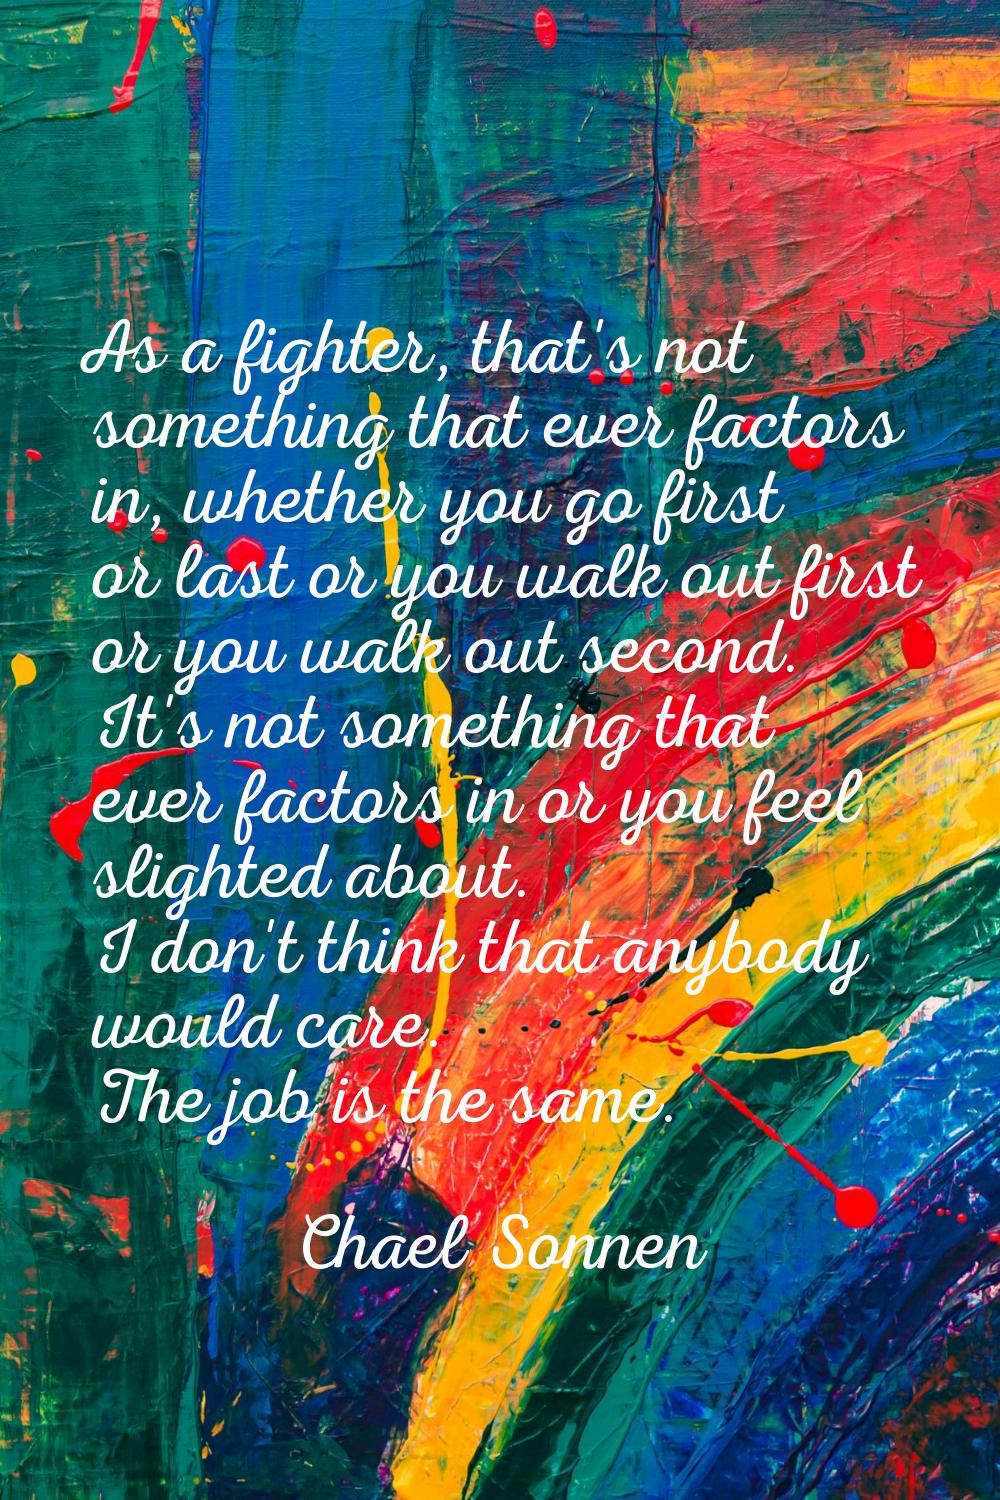 As a fighter, that's not something that ever factors in, whether you go first or last or you walk o